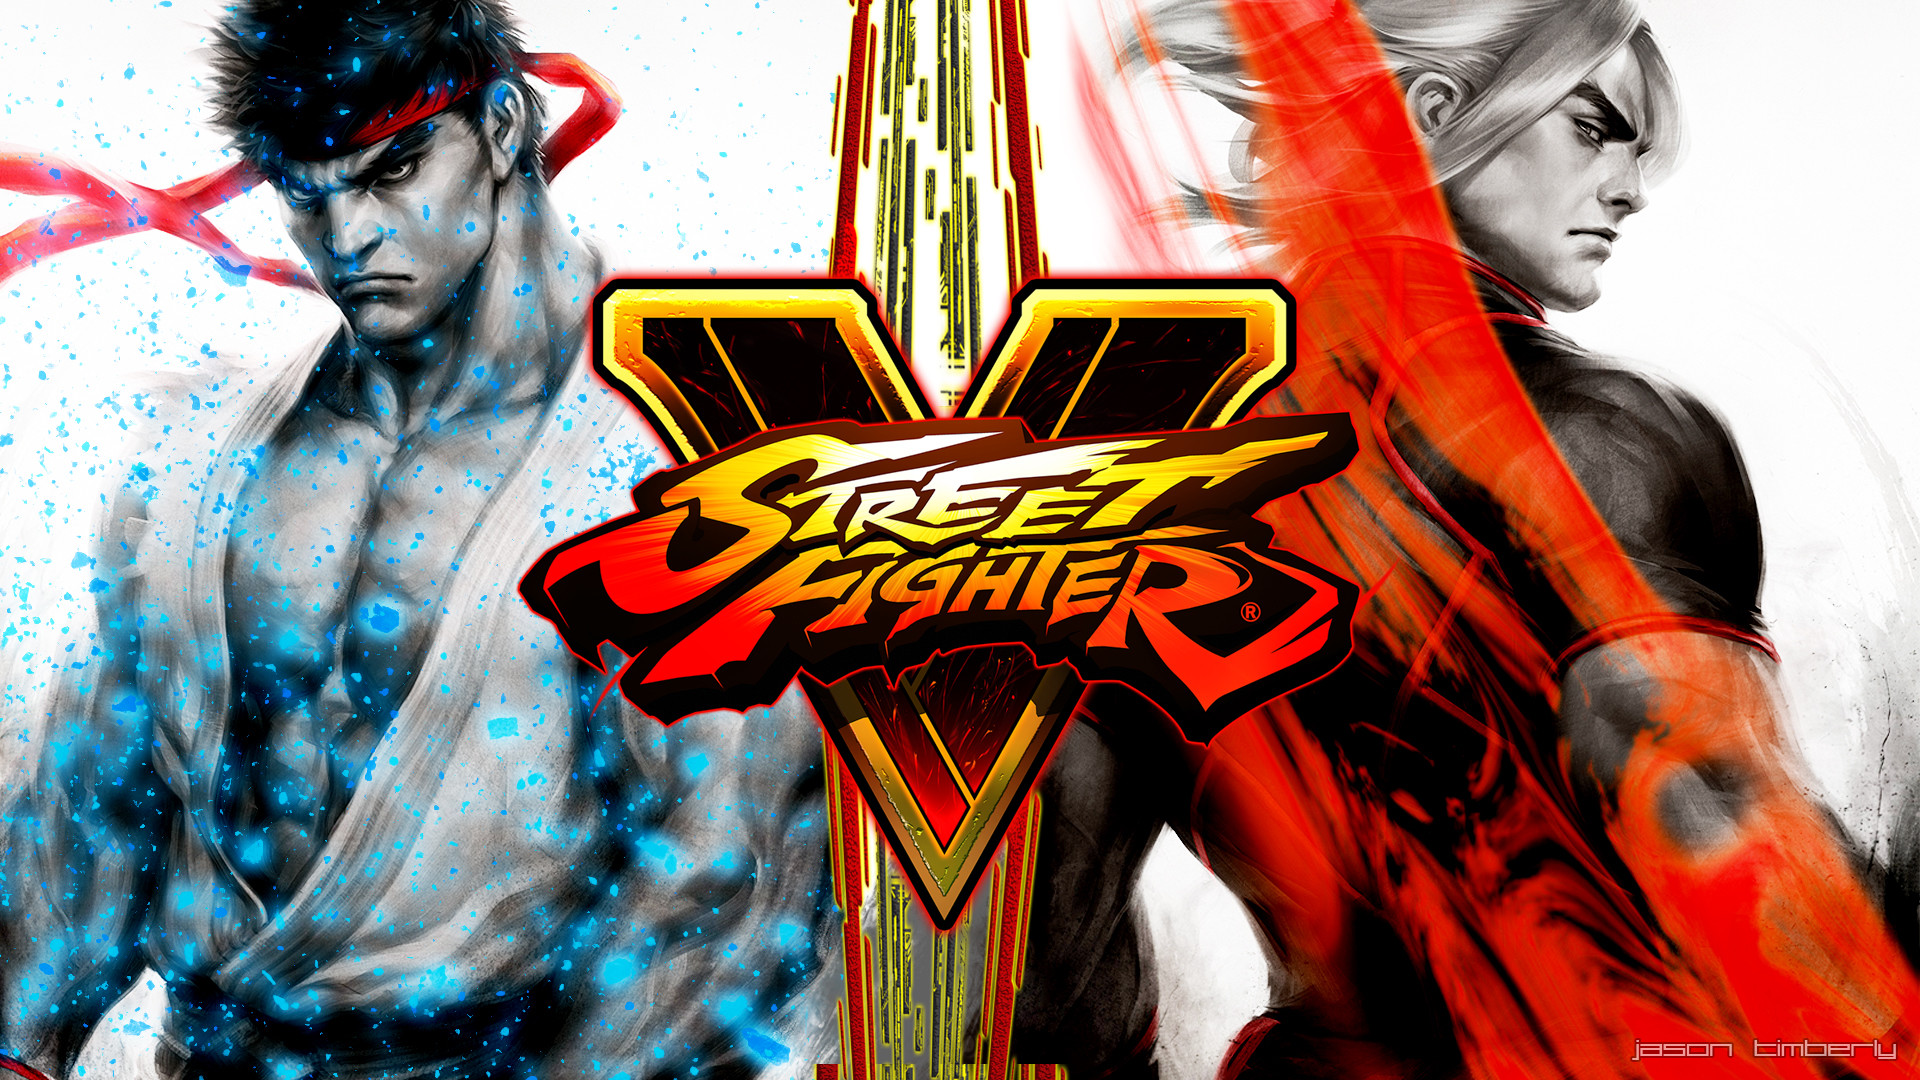 1920x1080 Video Game - Street Fighter Video Game Wallpaper